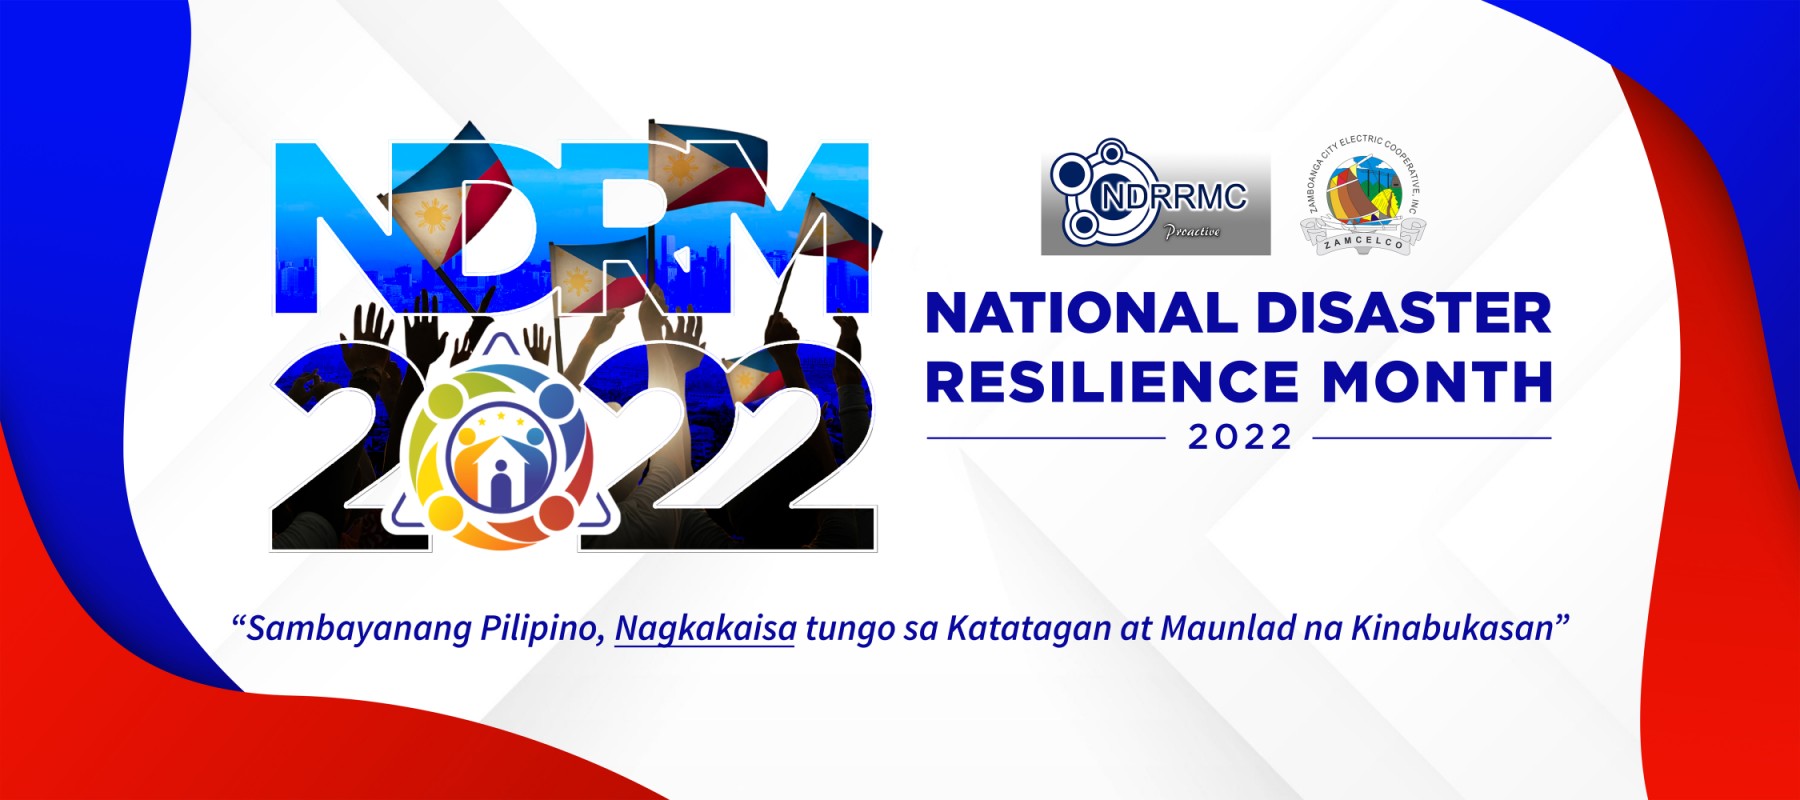 JULY is National Disaster Resiliency Month (NDRM)